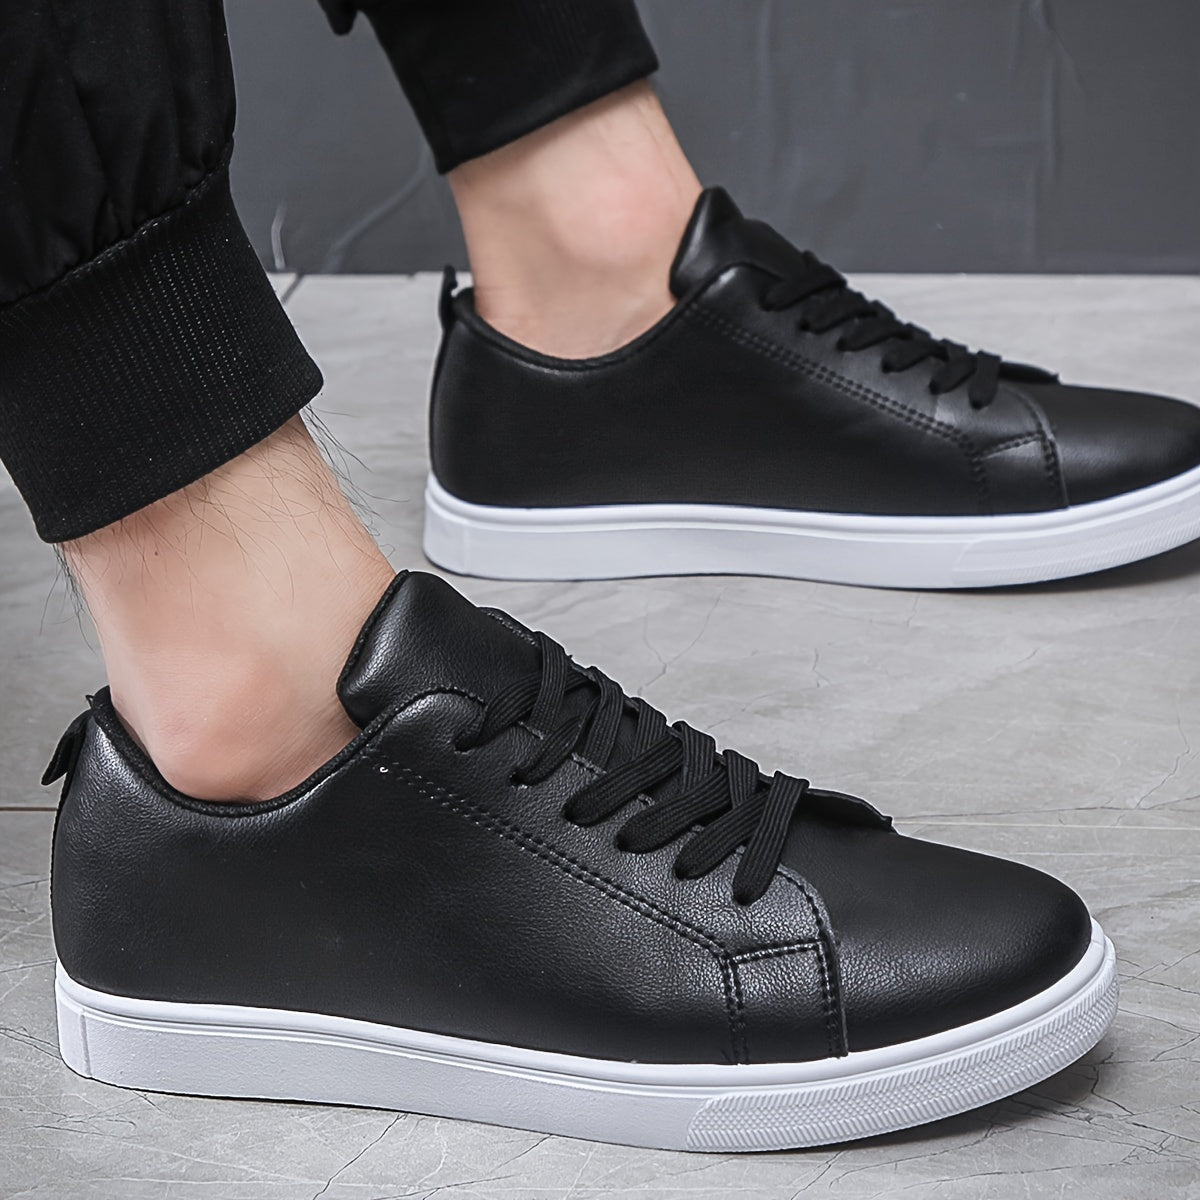 Men's PU Leather Lace-up Skate Sneakers